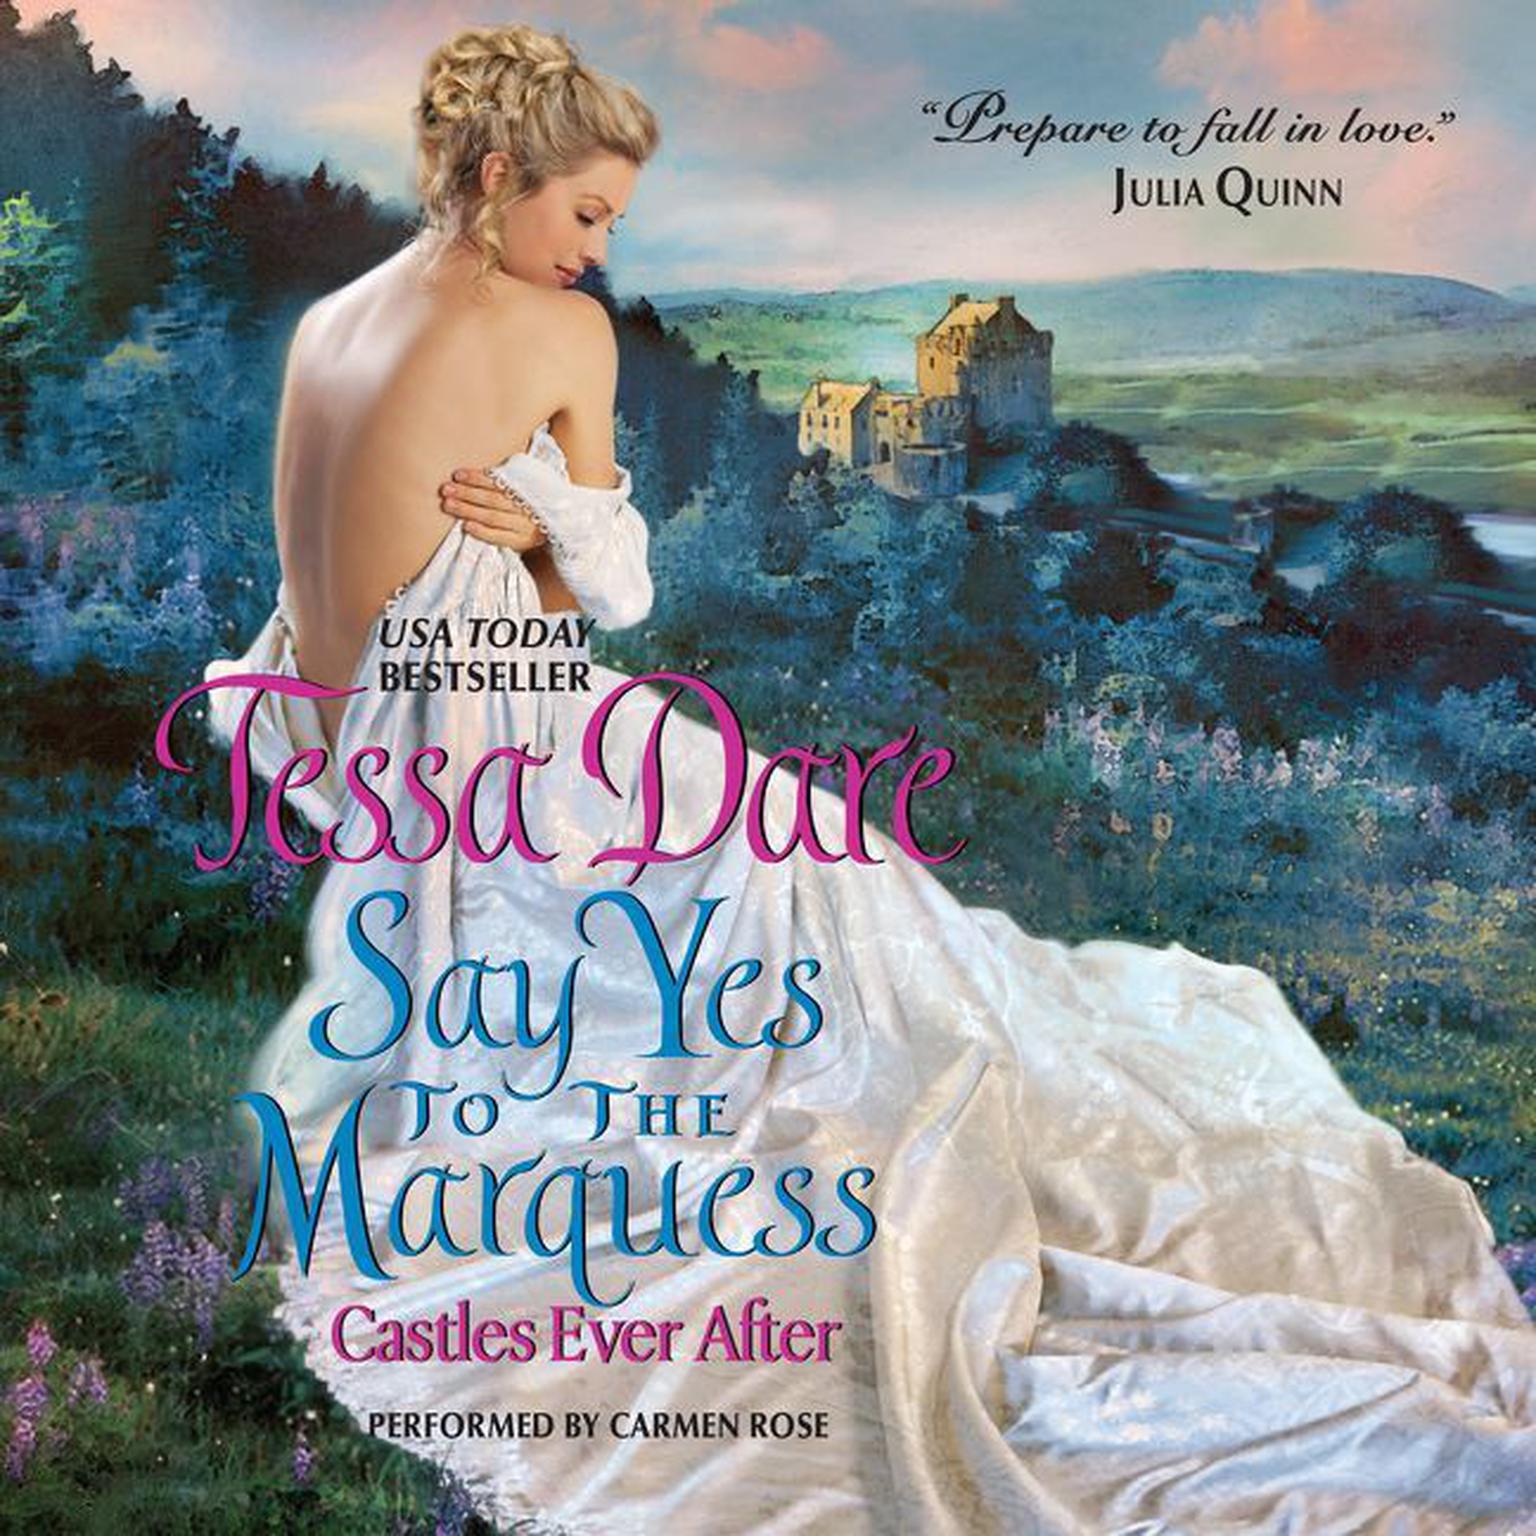 Say Yes to the Marquess: Castles Ever After Audiobook, by Tessa Dare